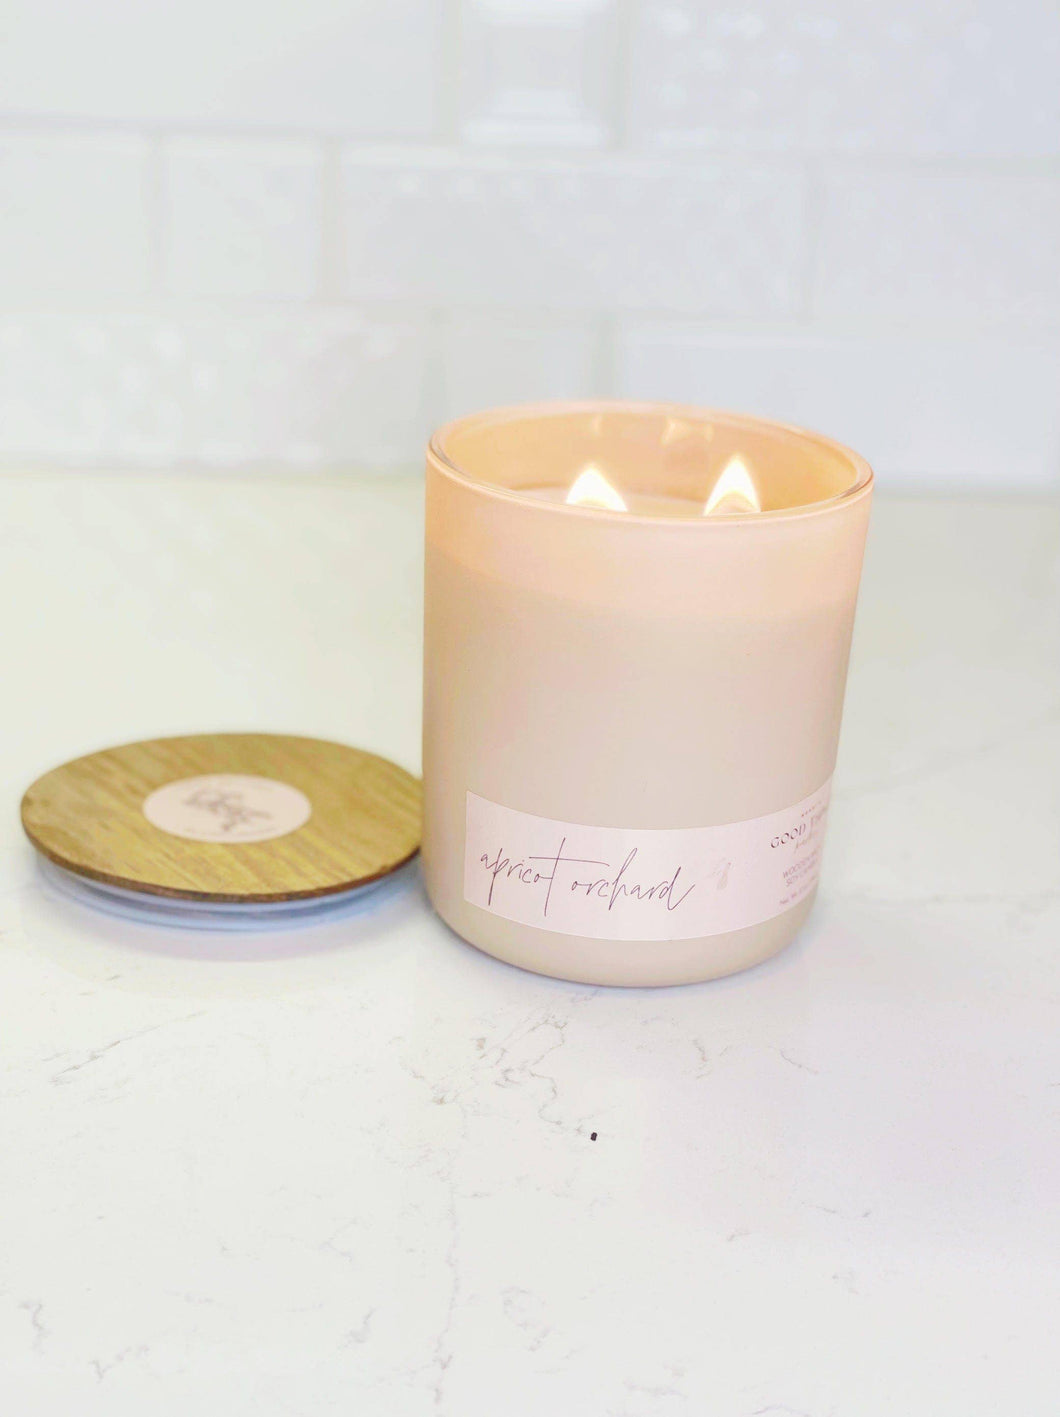 Apricot Orchard Soy Candle